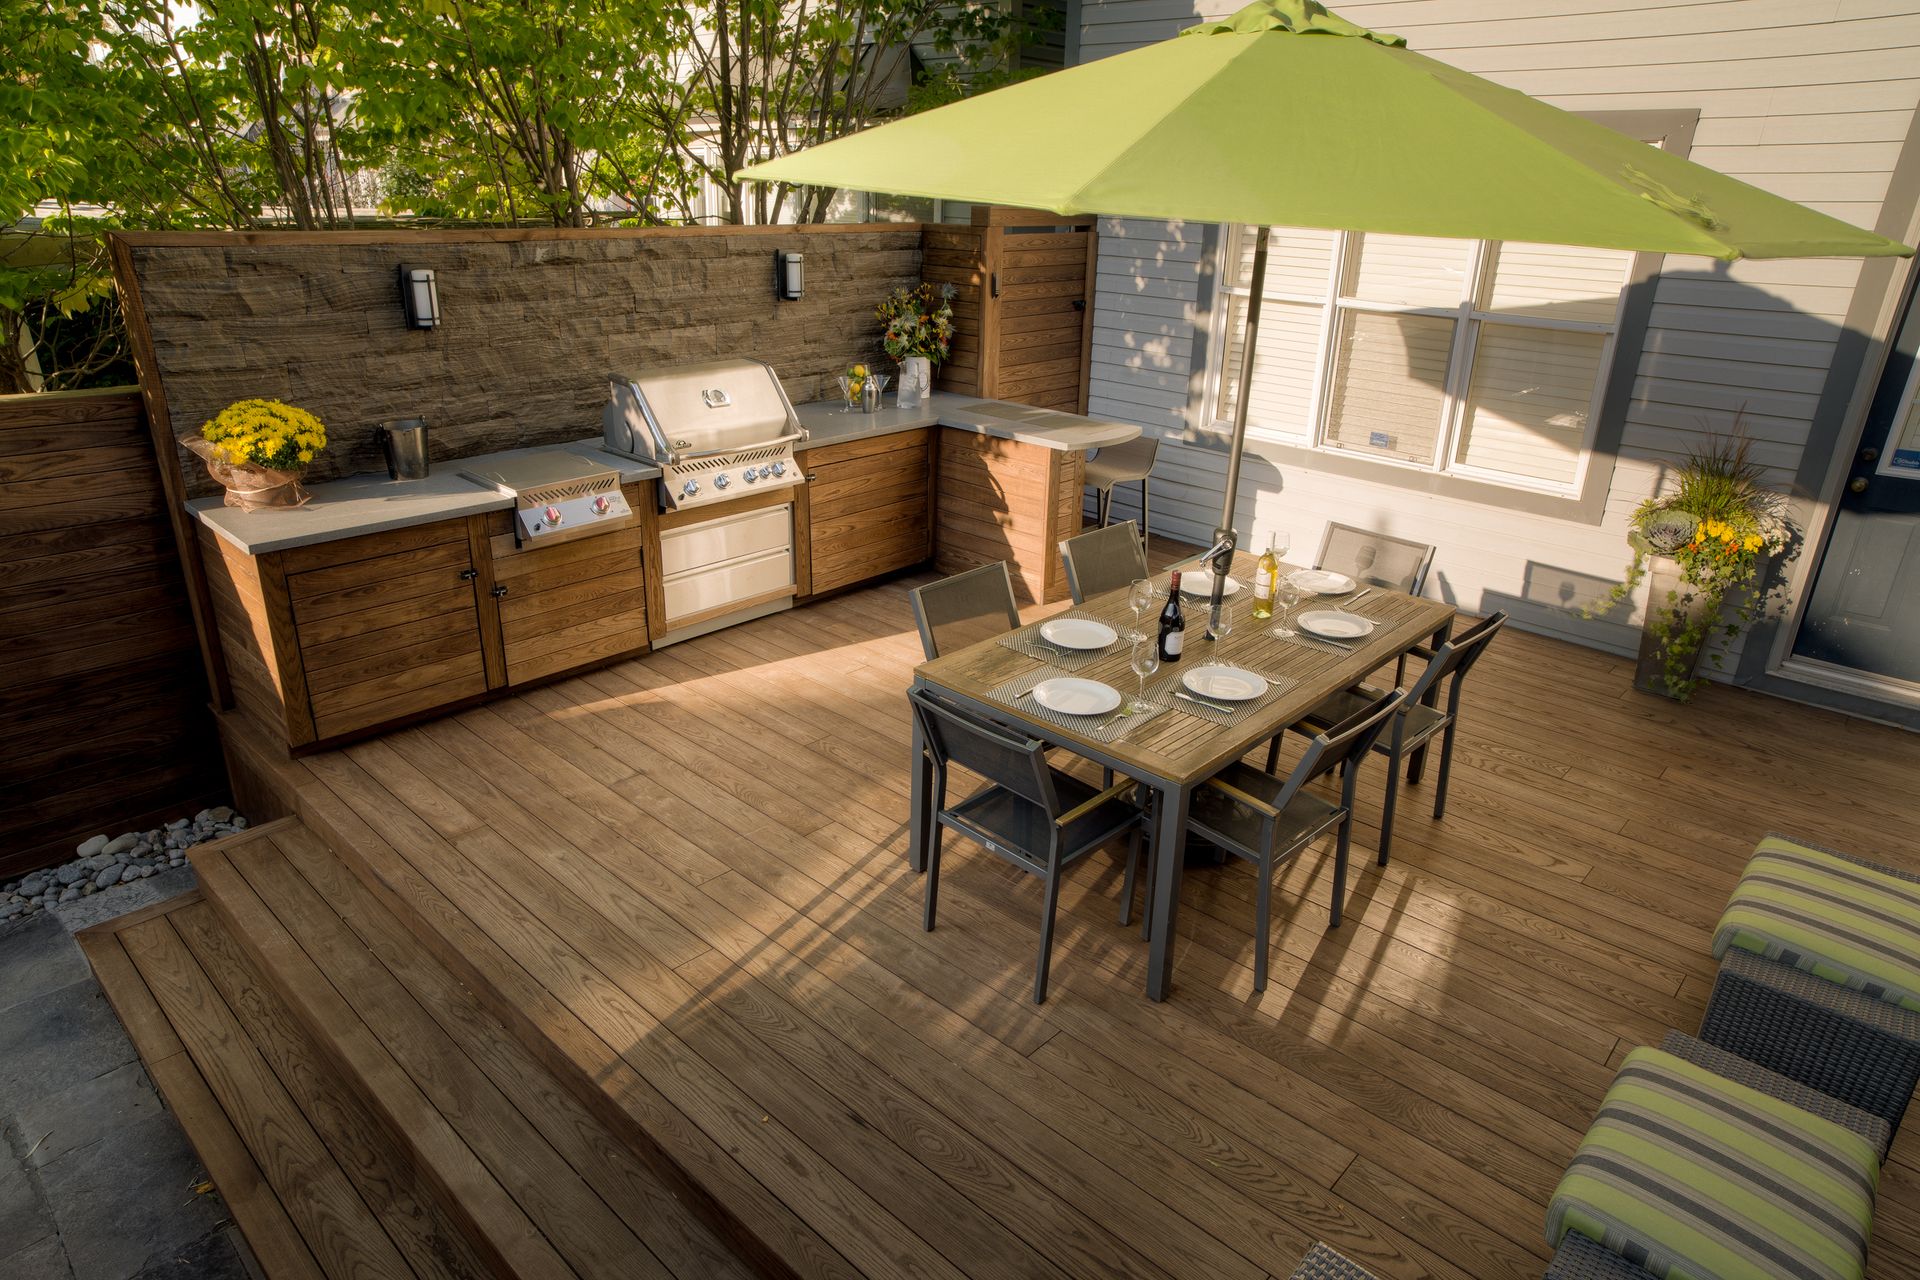 thermory deck with outdoor kitchen